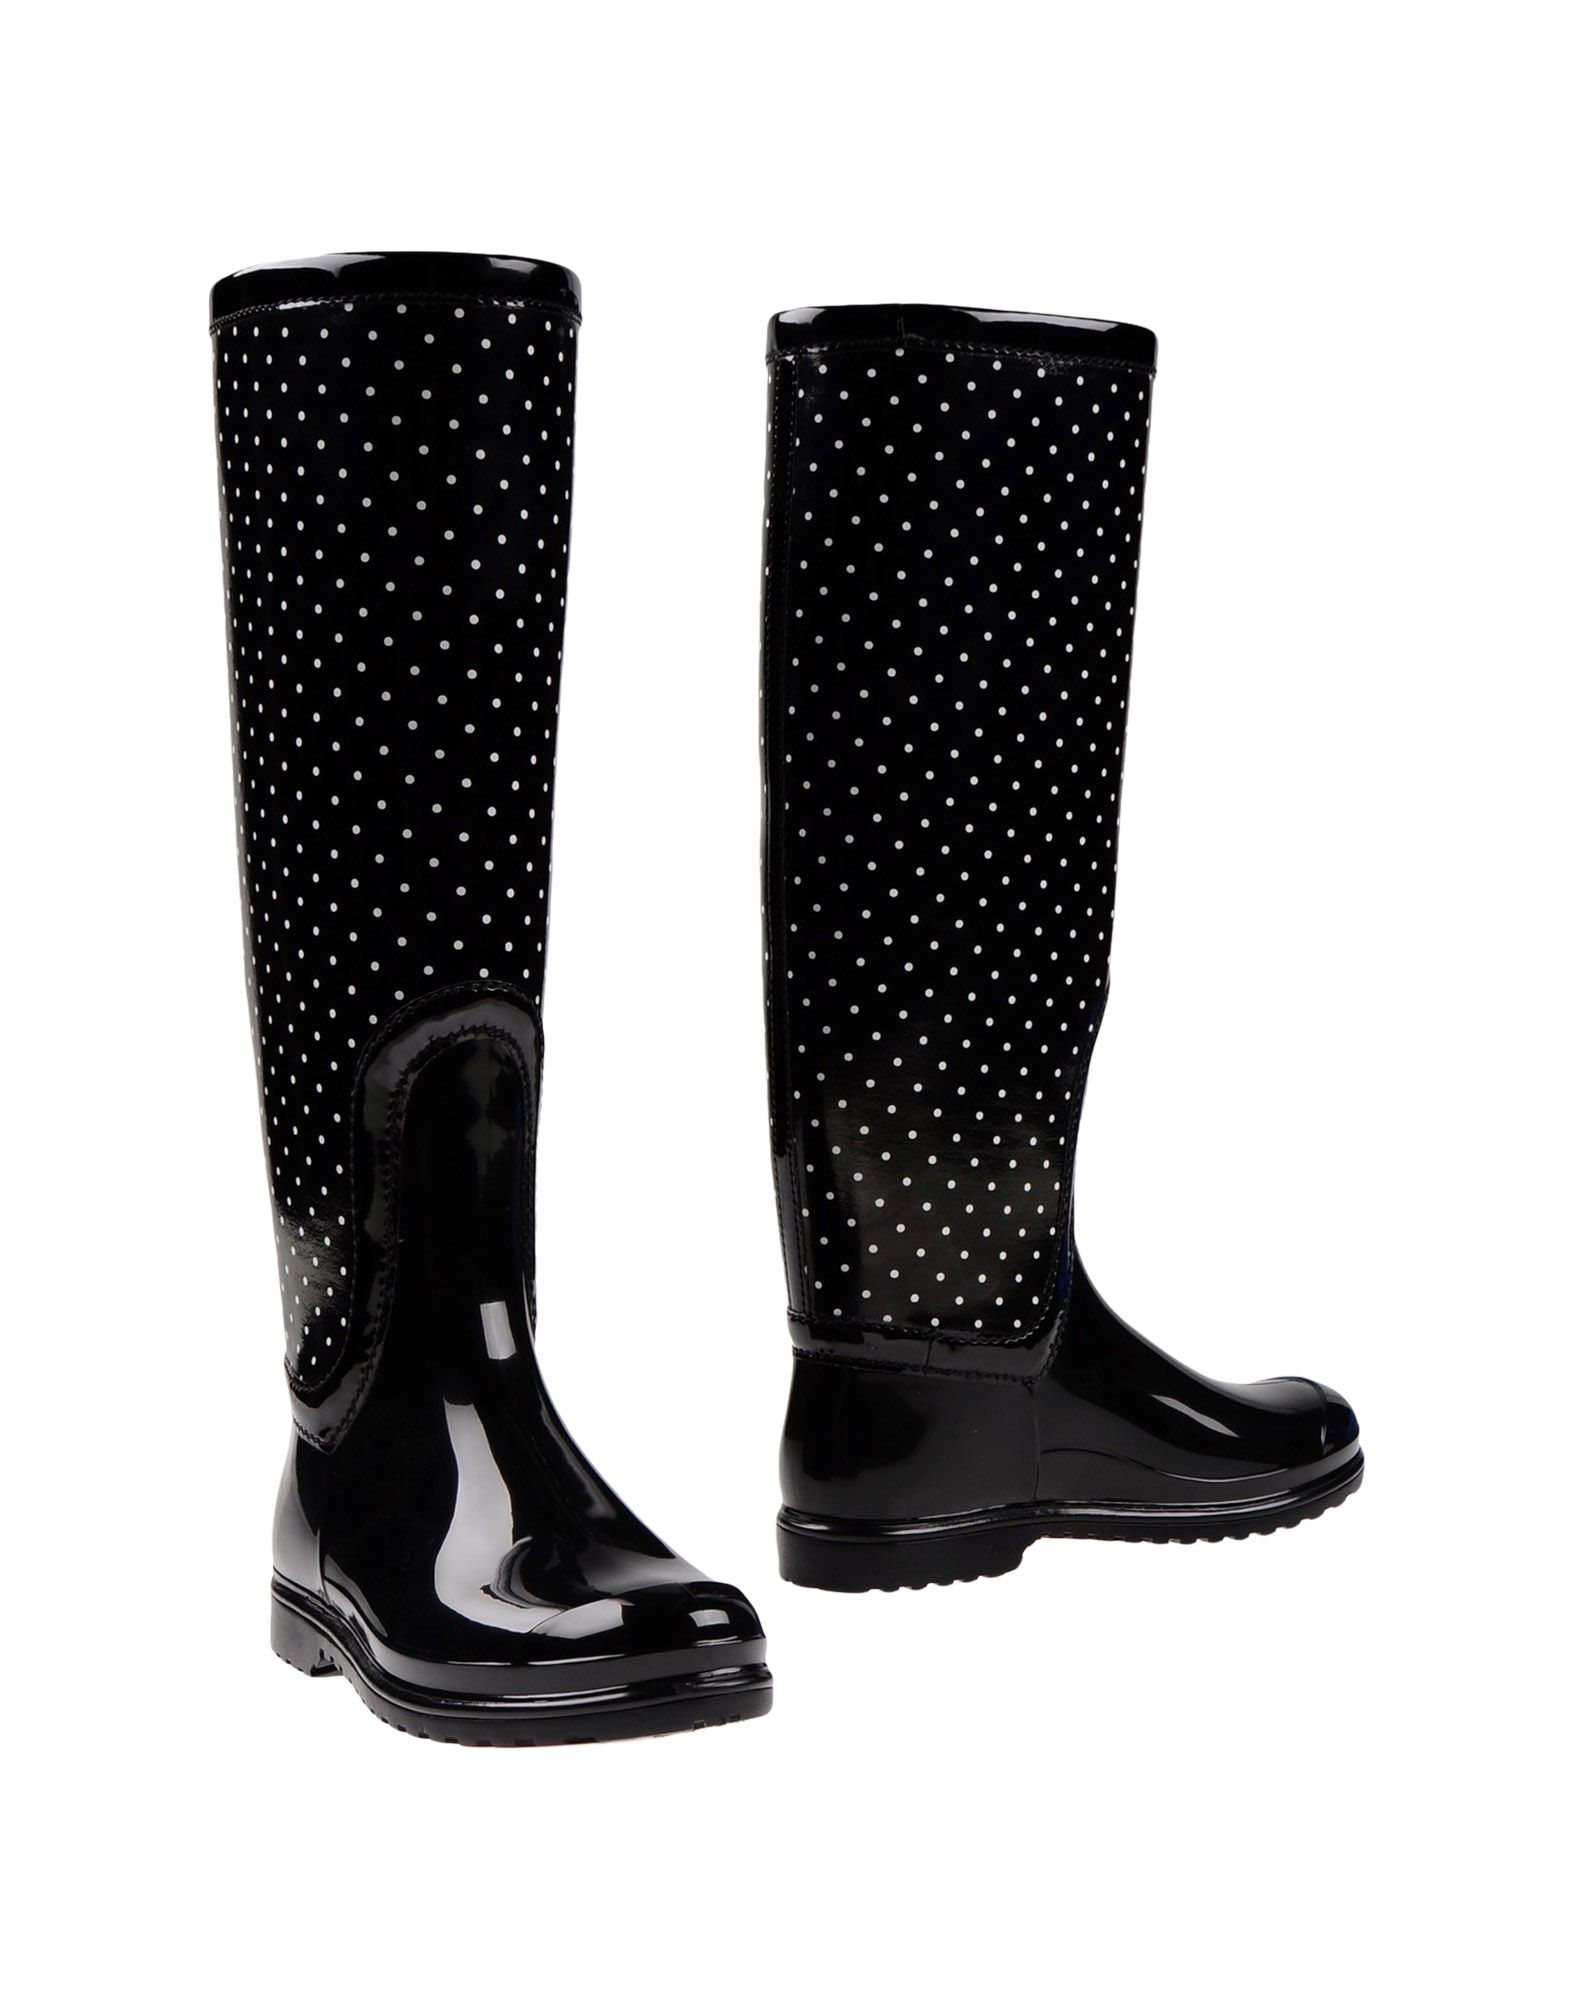 dolce and gabbana wellies